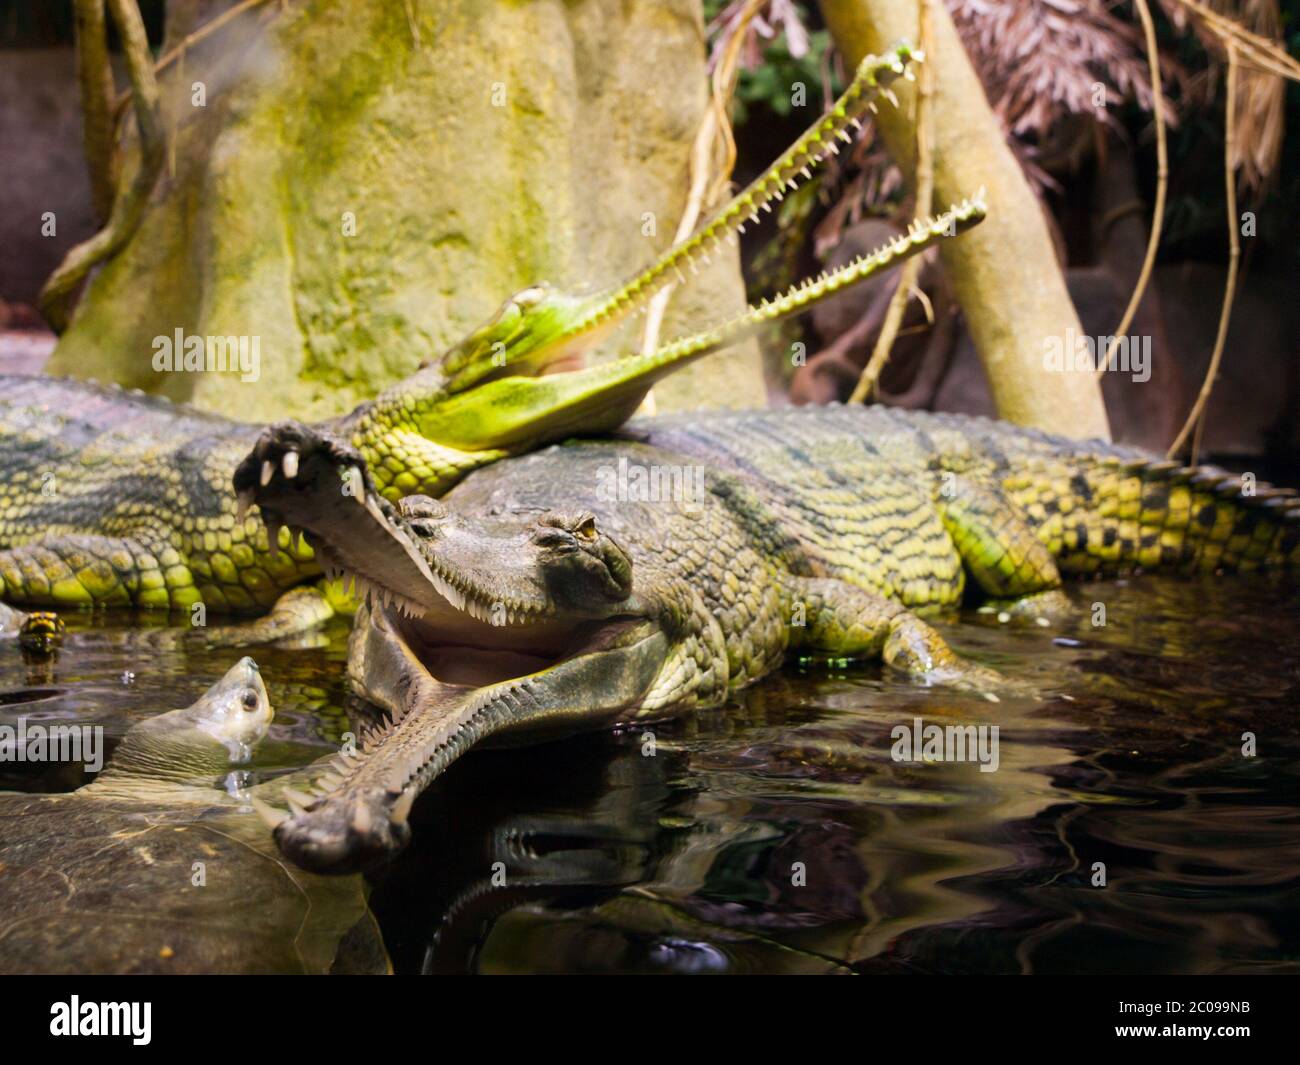 Gharial, or gavial - Gavialis gangeticus - with open mouth full of sharp teeth. Shallow depth of field. Stock Photo